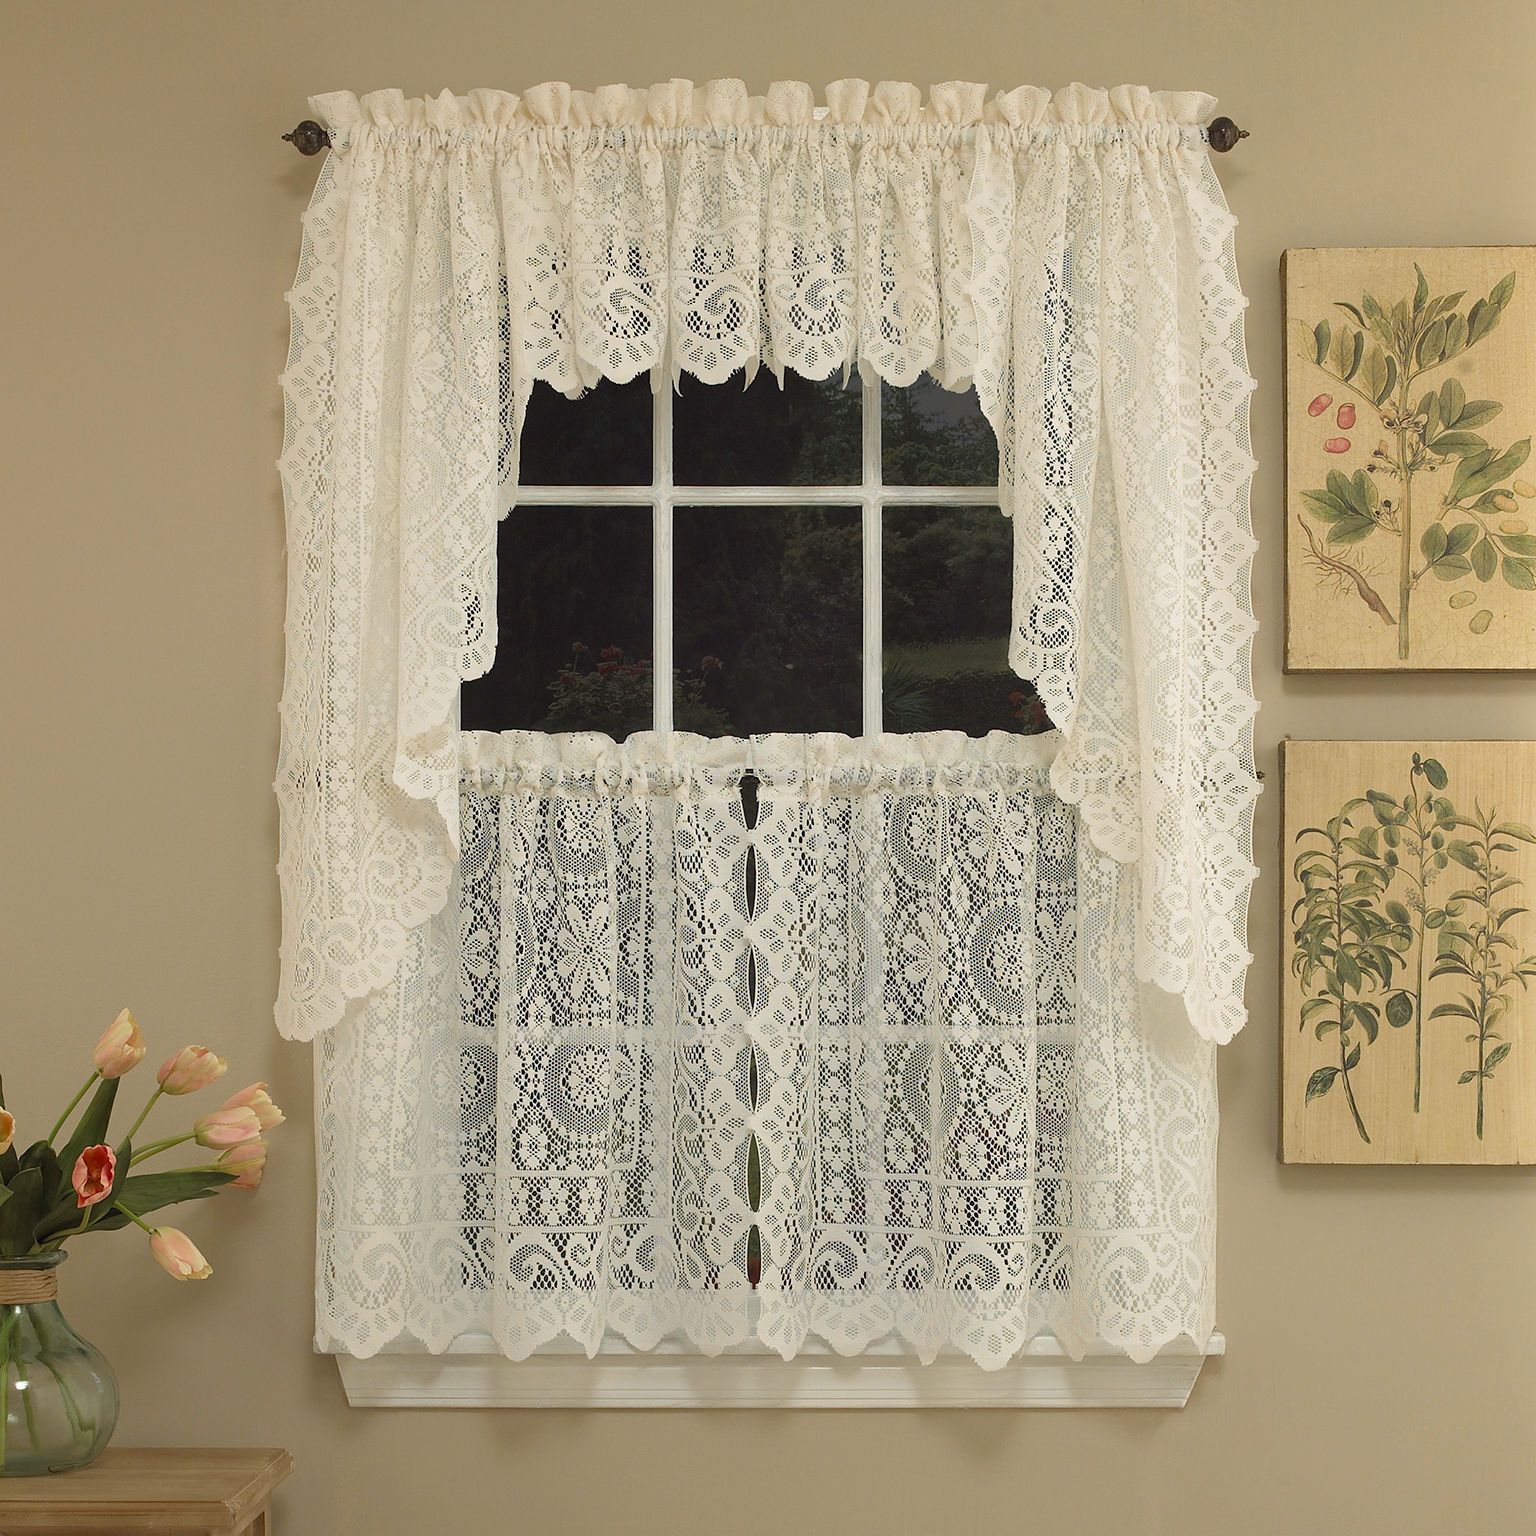 Hopewell Heavy Cream Lace Kitchen Curtain Choice Of Tier Valance Or Swag With Luxurious Kitchen Curtains Tiers, Shade Or Valances (Photo 5 of 20)